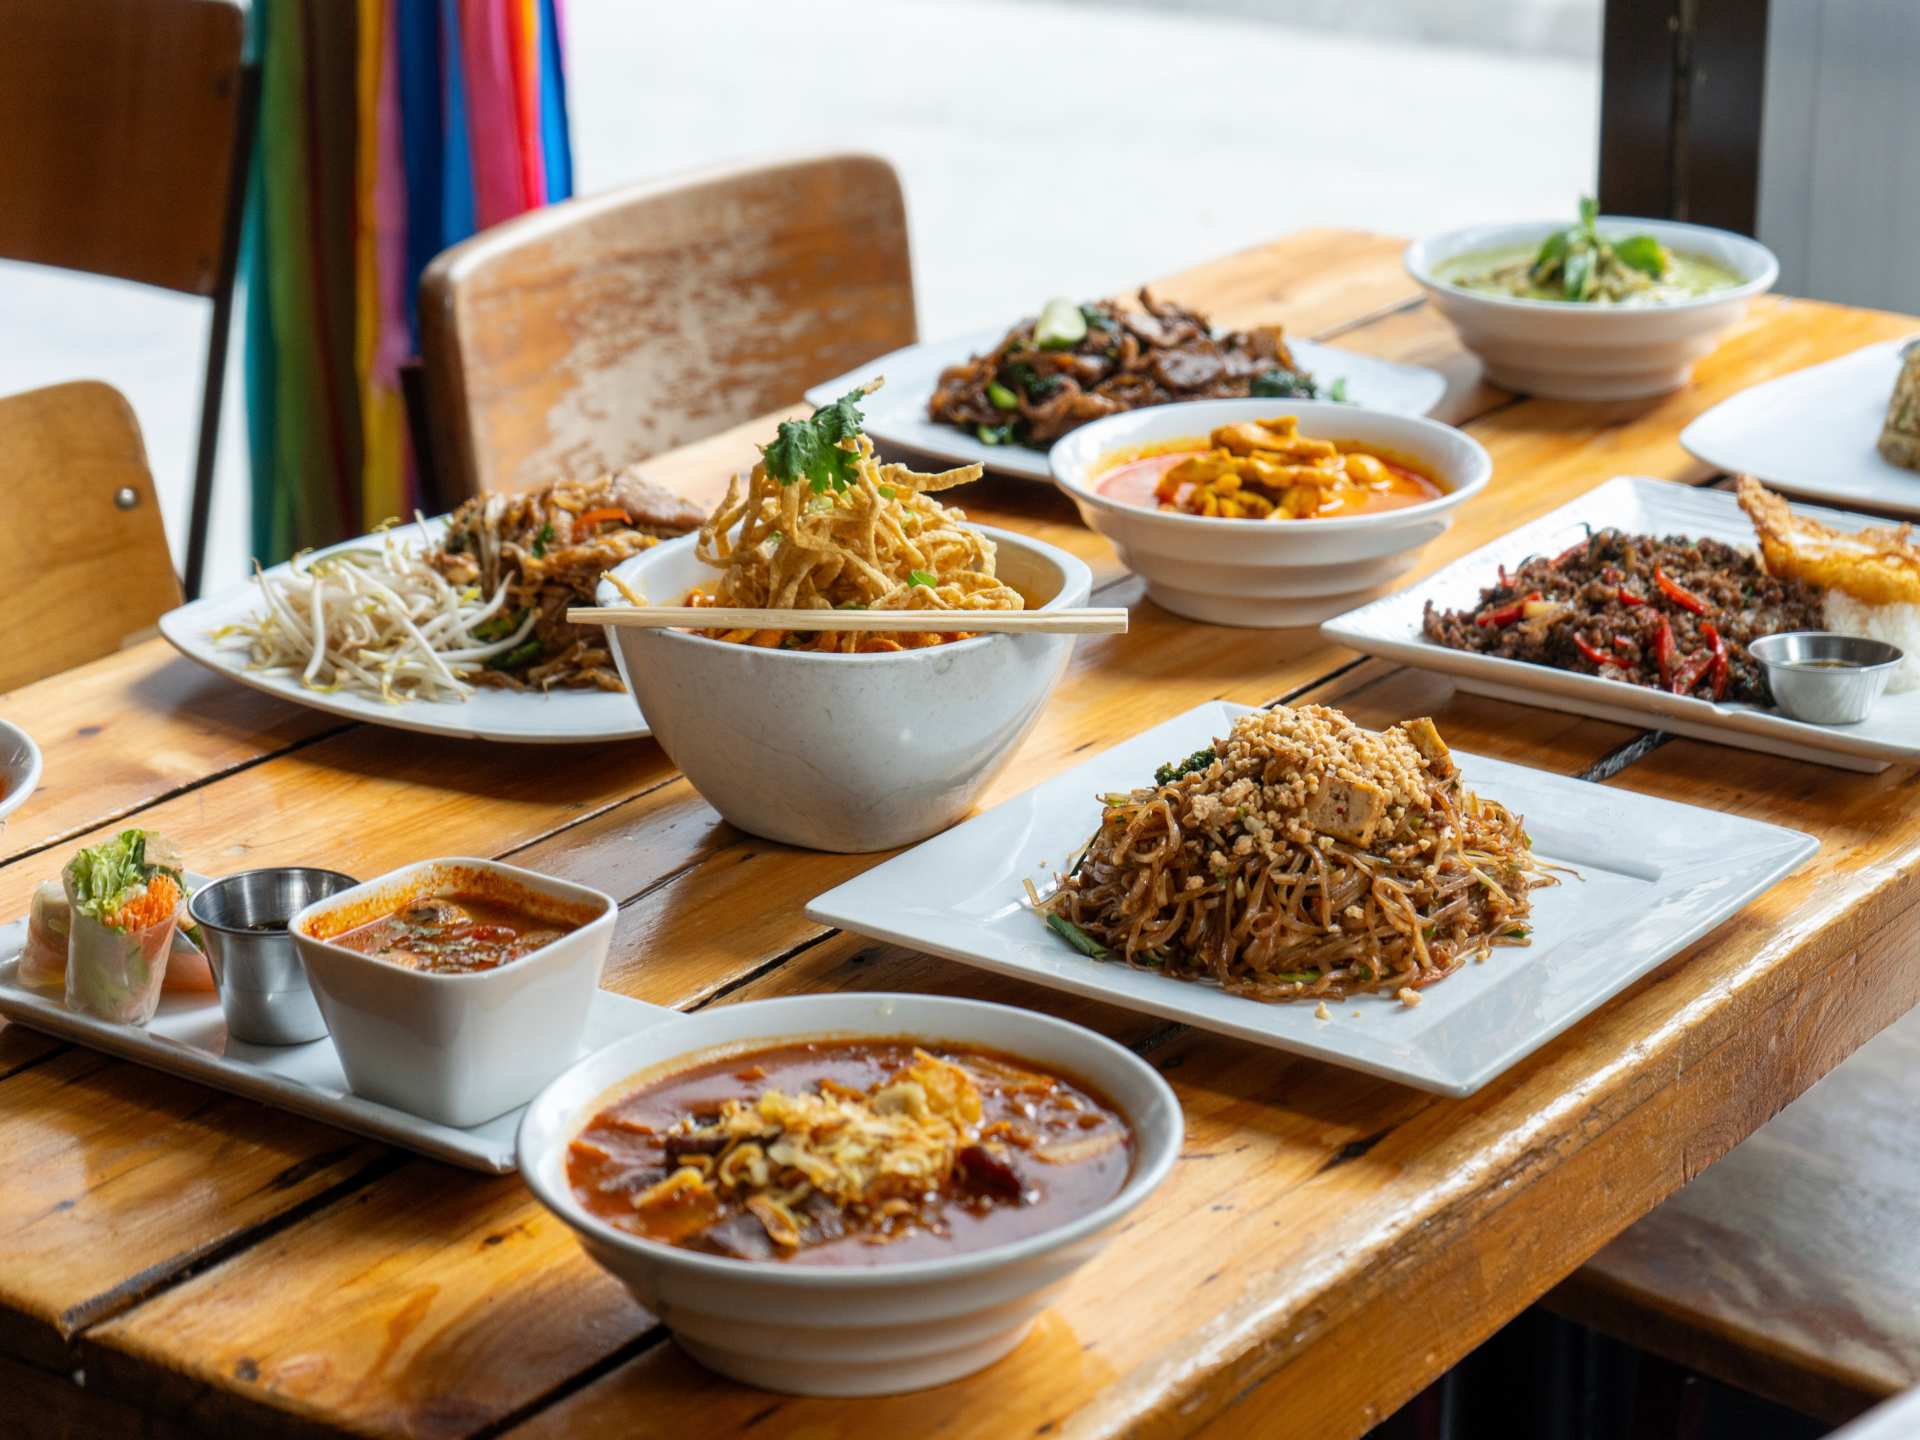 Best Thai restaurants in Toronto | A spread of dishes at Khao San Road